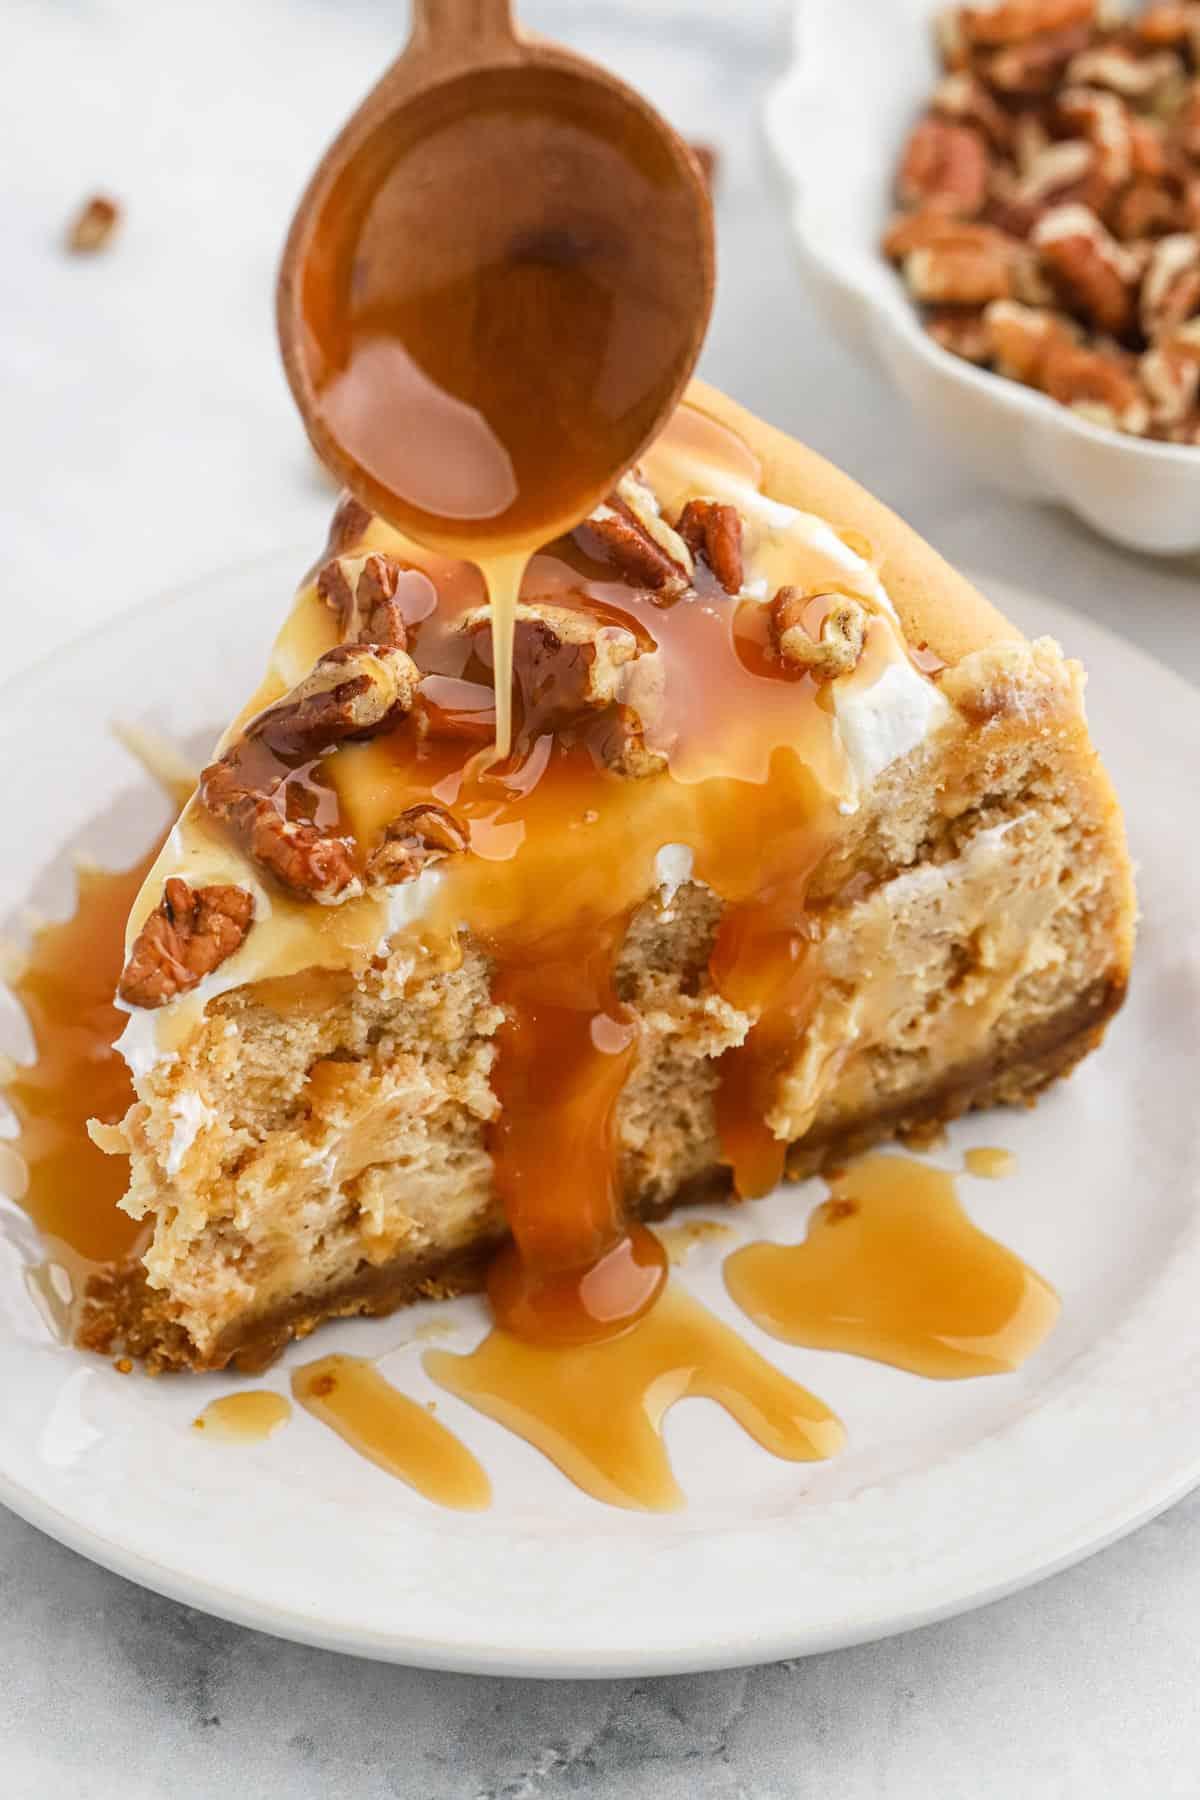 Caramel pouring over Sweet Potato cheesecake recipe with a spoon.